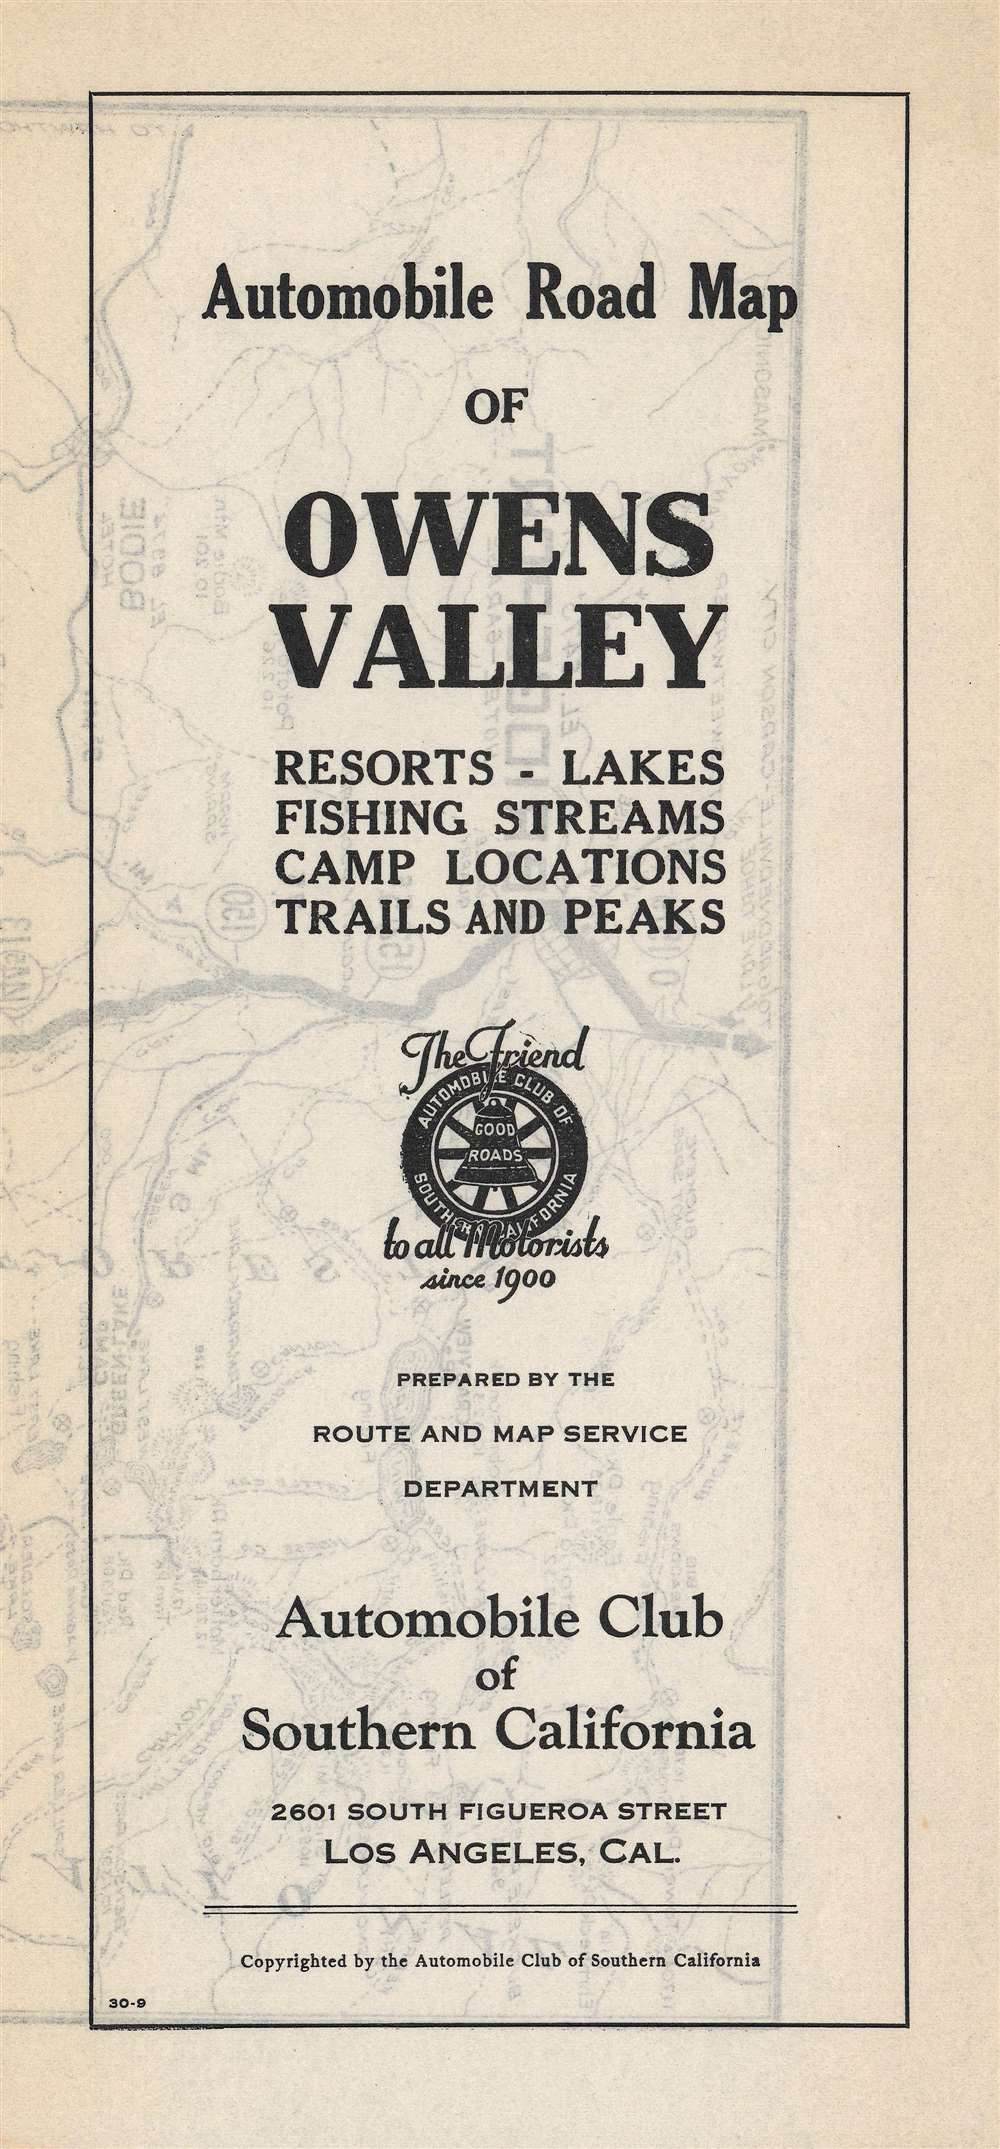 Automobile road map of Owens Valley : resort, lakes, fishing streams, camp locations, trails and peaks. - Alternate View 2